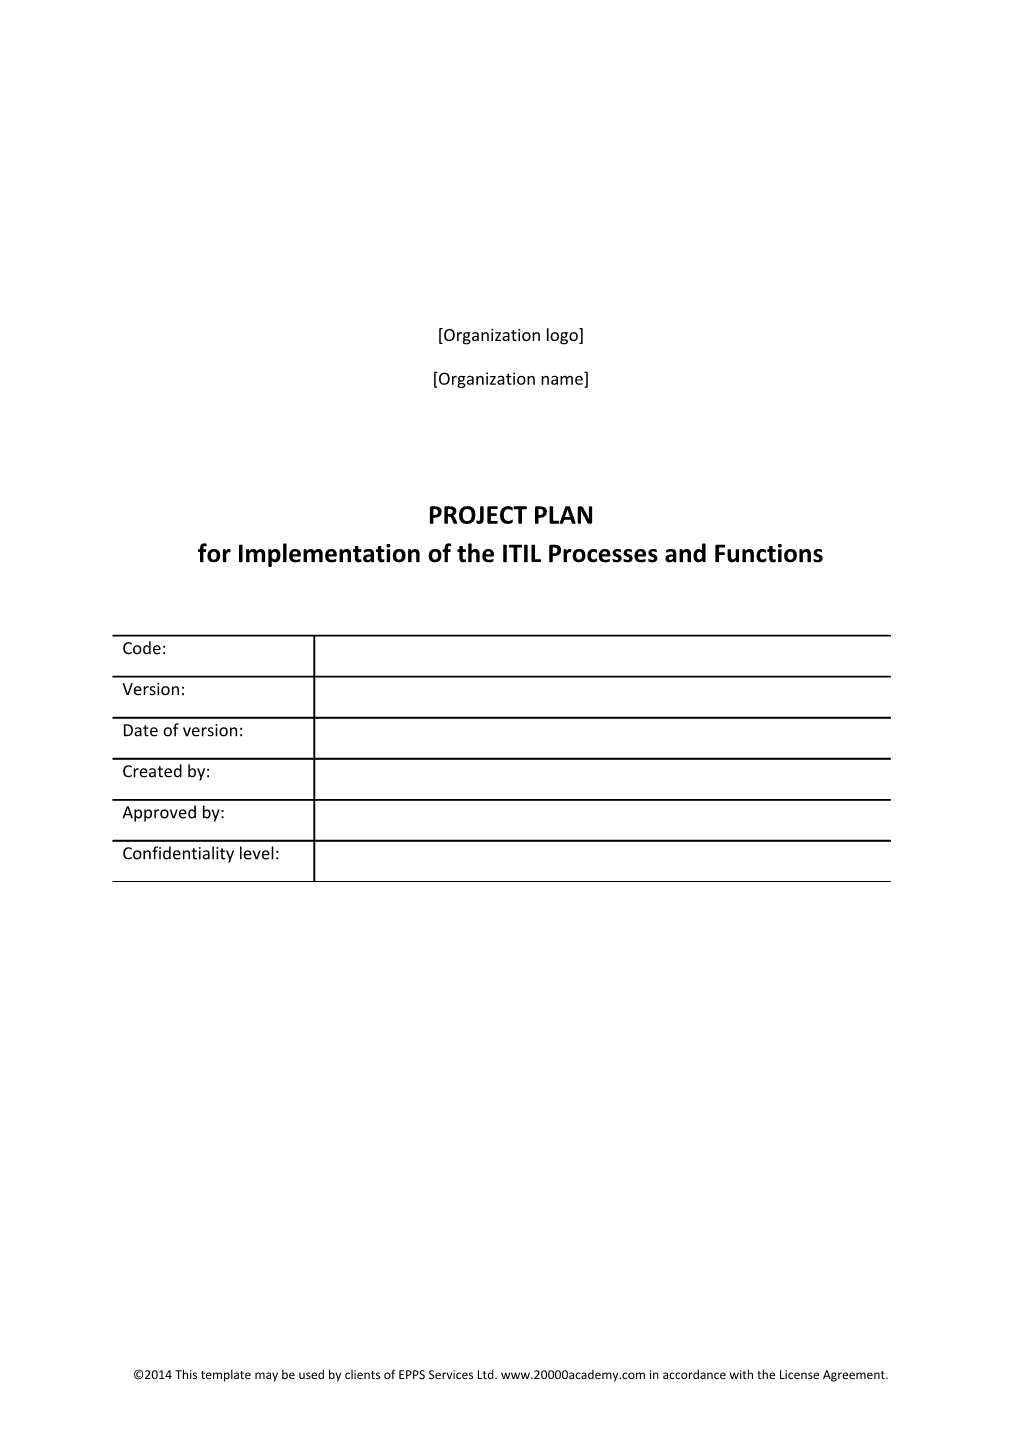 Project Plan for Implementation of the ITIL Processes and Functions